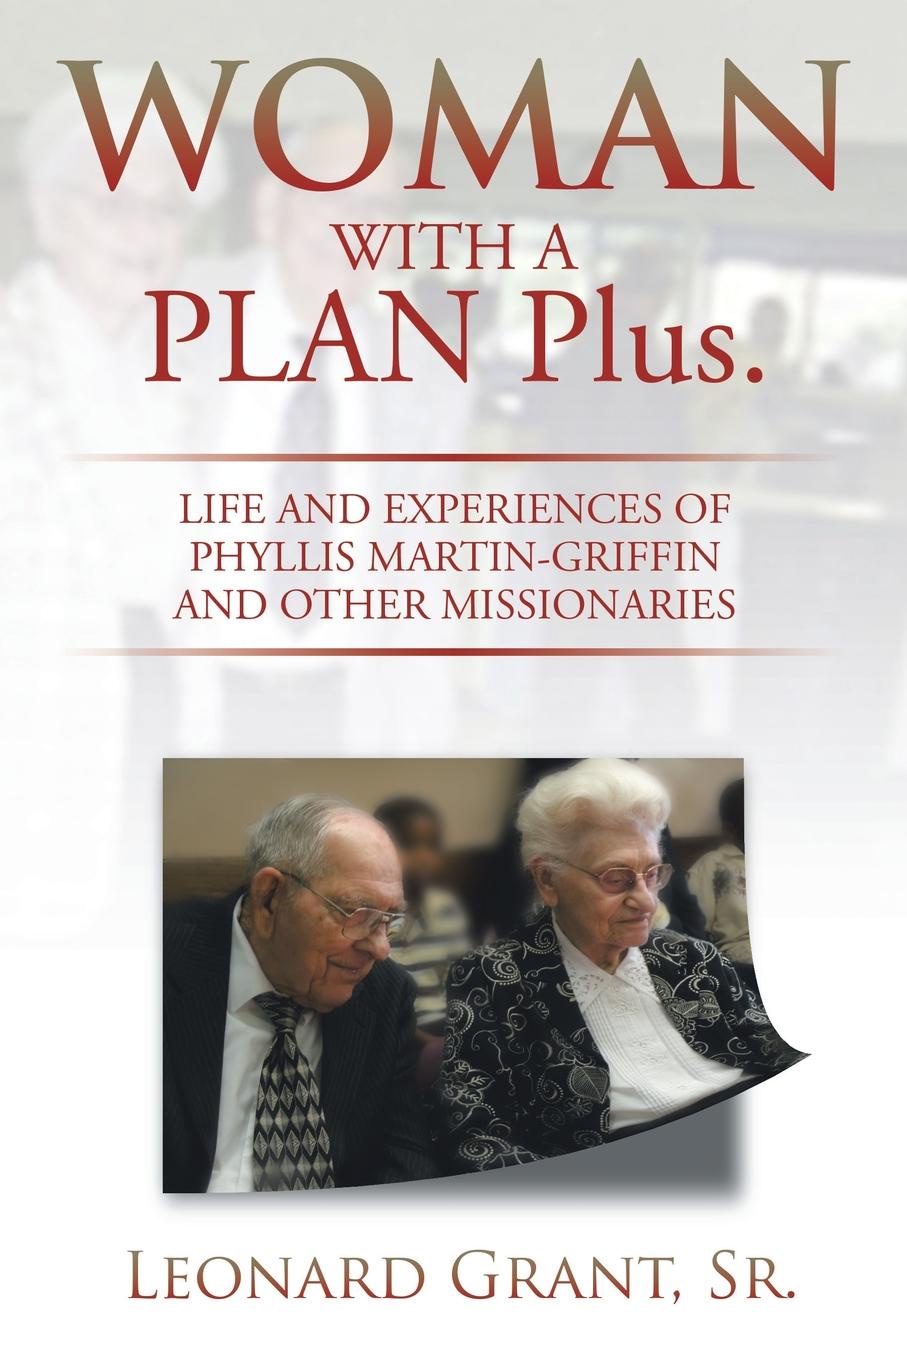 Woman with a Plan Plus. Life and Experiences of Phyllis Martin-Griffin and Other Missionaries